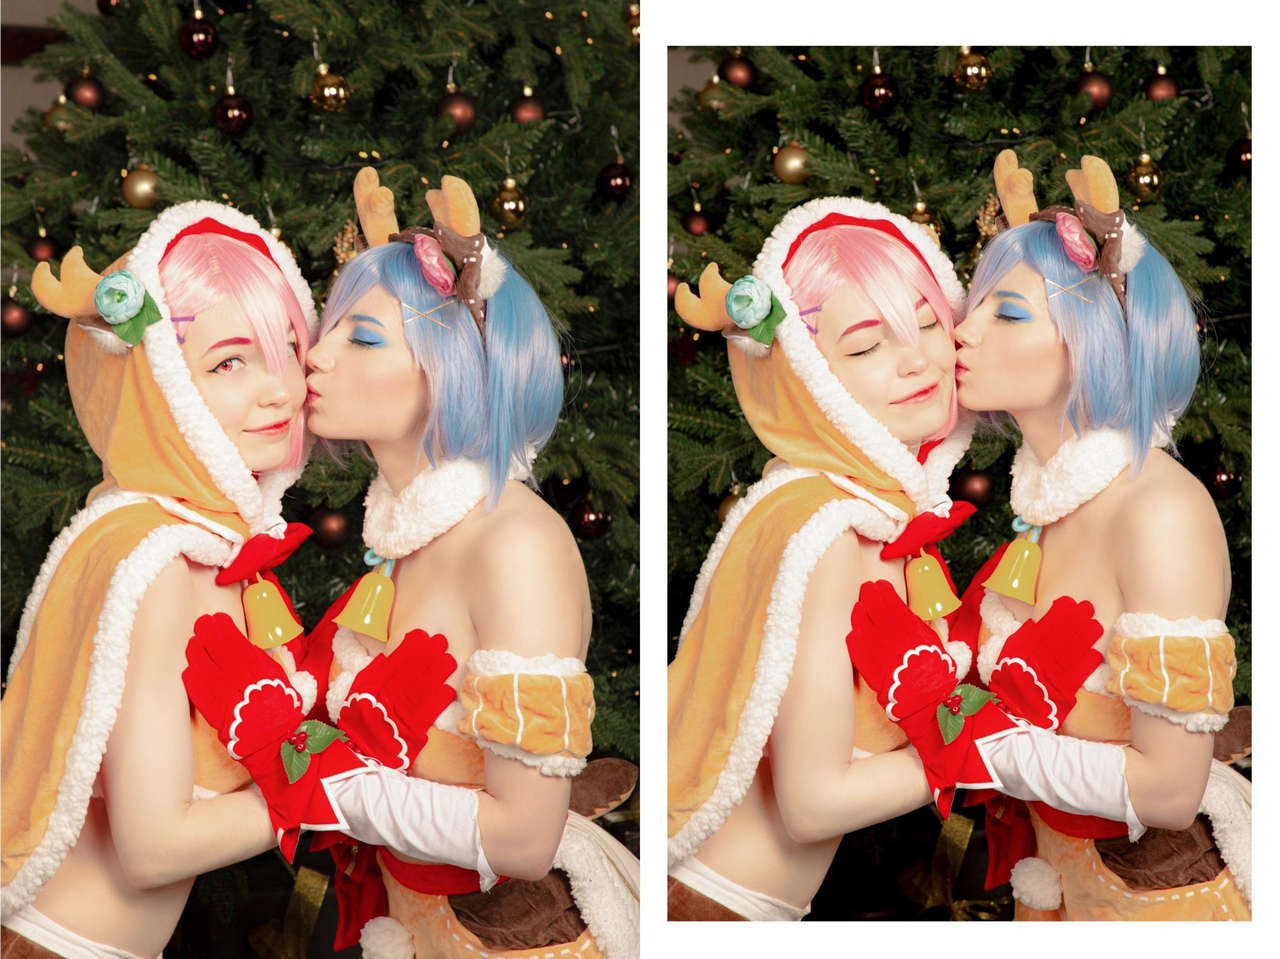 Rem And Ram Cosplay By Carrykey And Murrning Glo